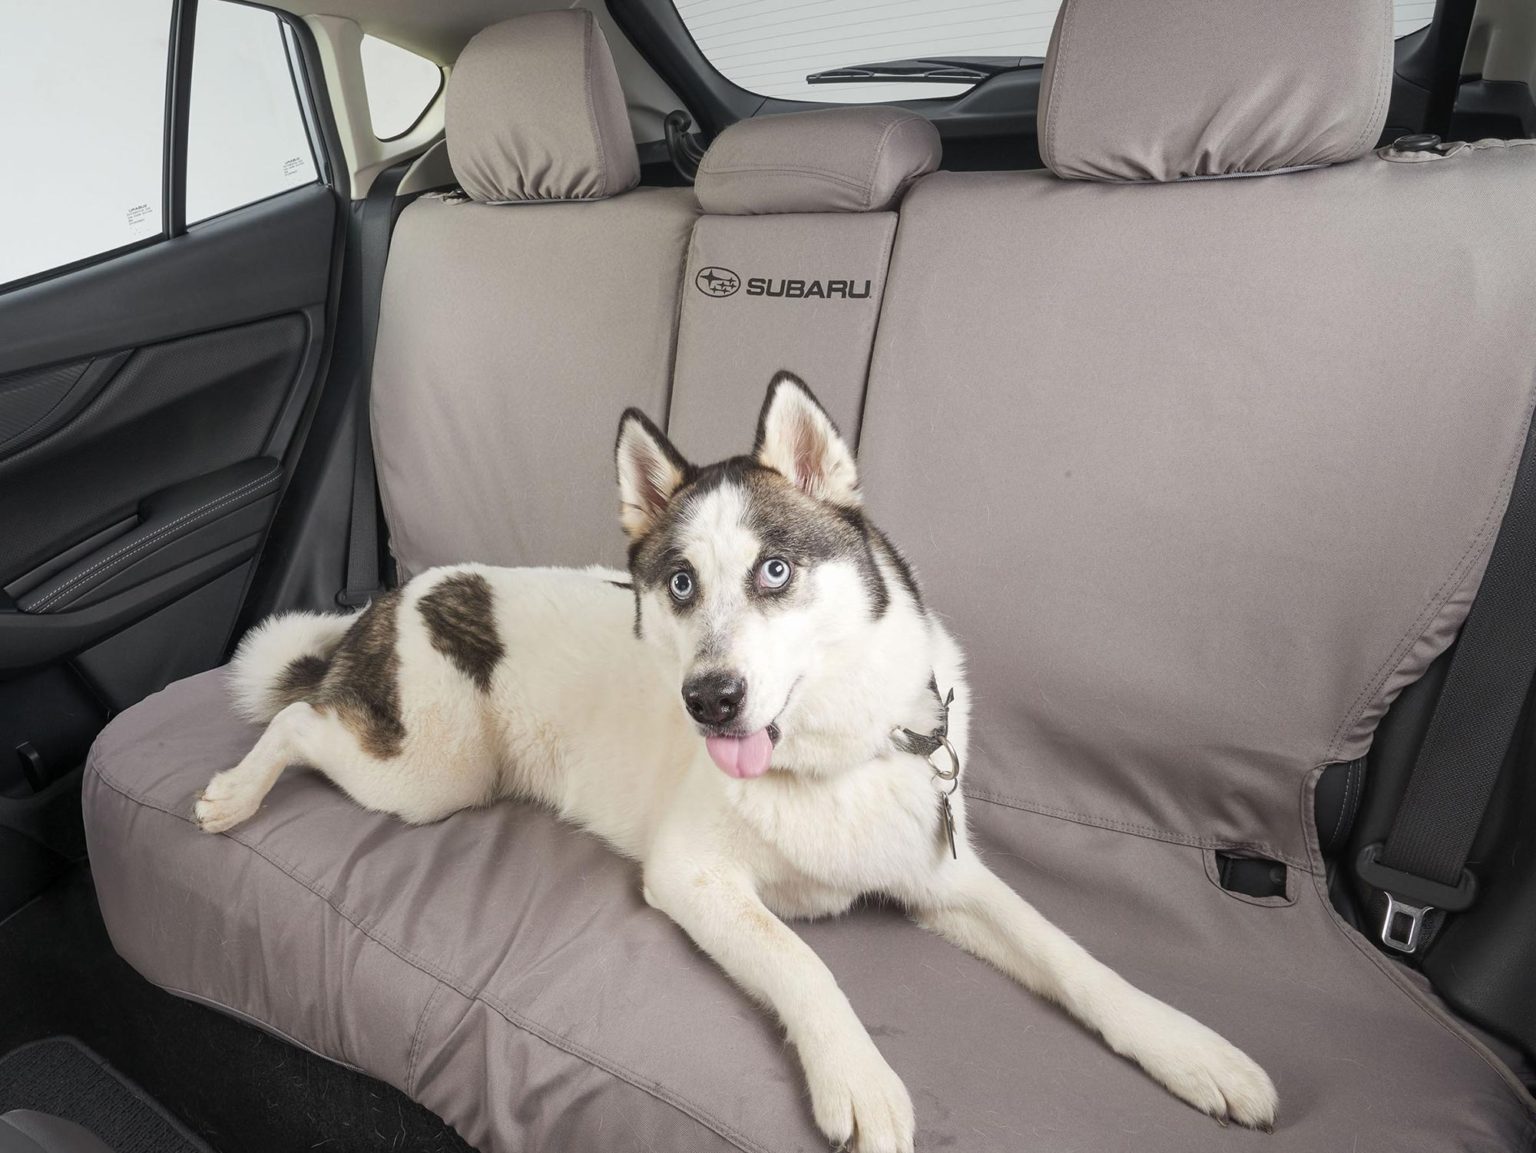 Subaru has teamed up with Sleepypod to create a series of pet accessories.